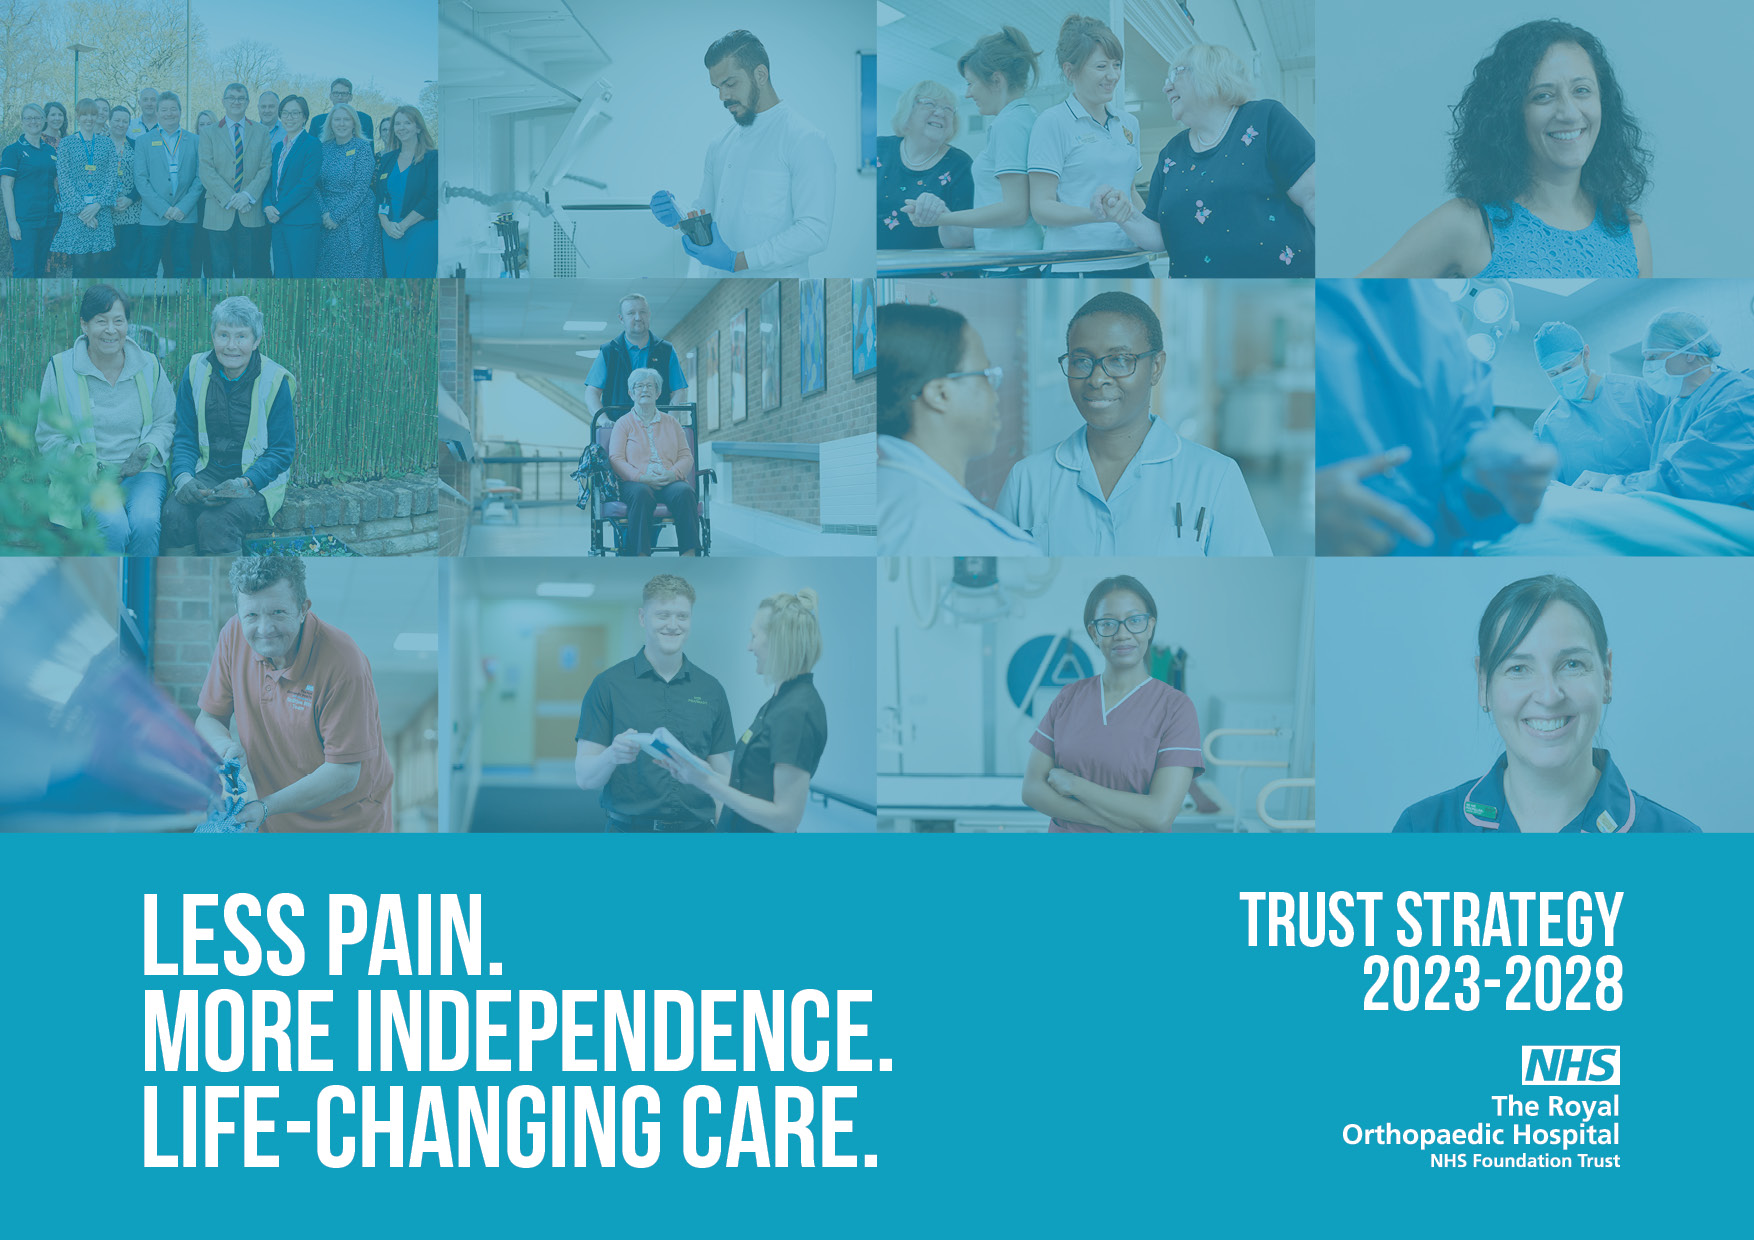 An image of the front cover of our strategy featuring members of staff smiling